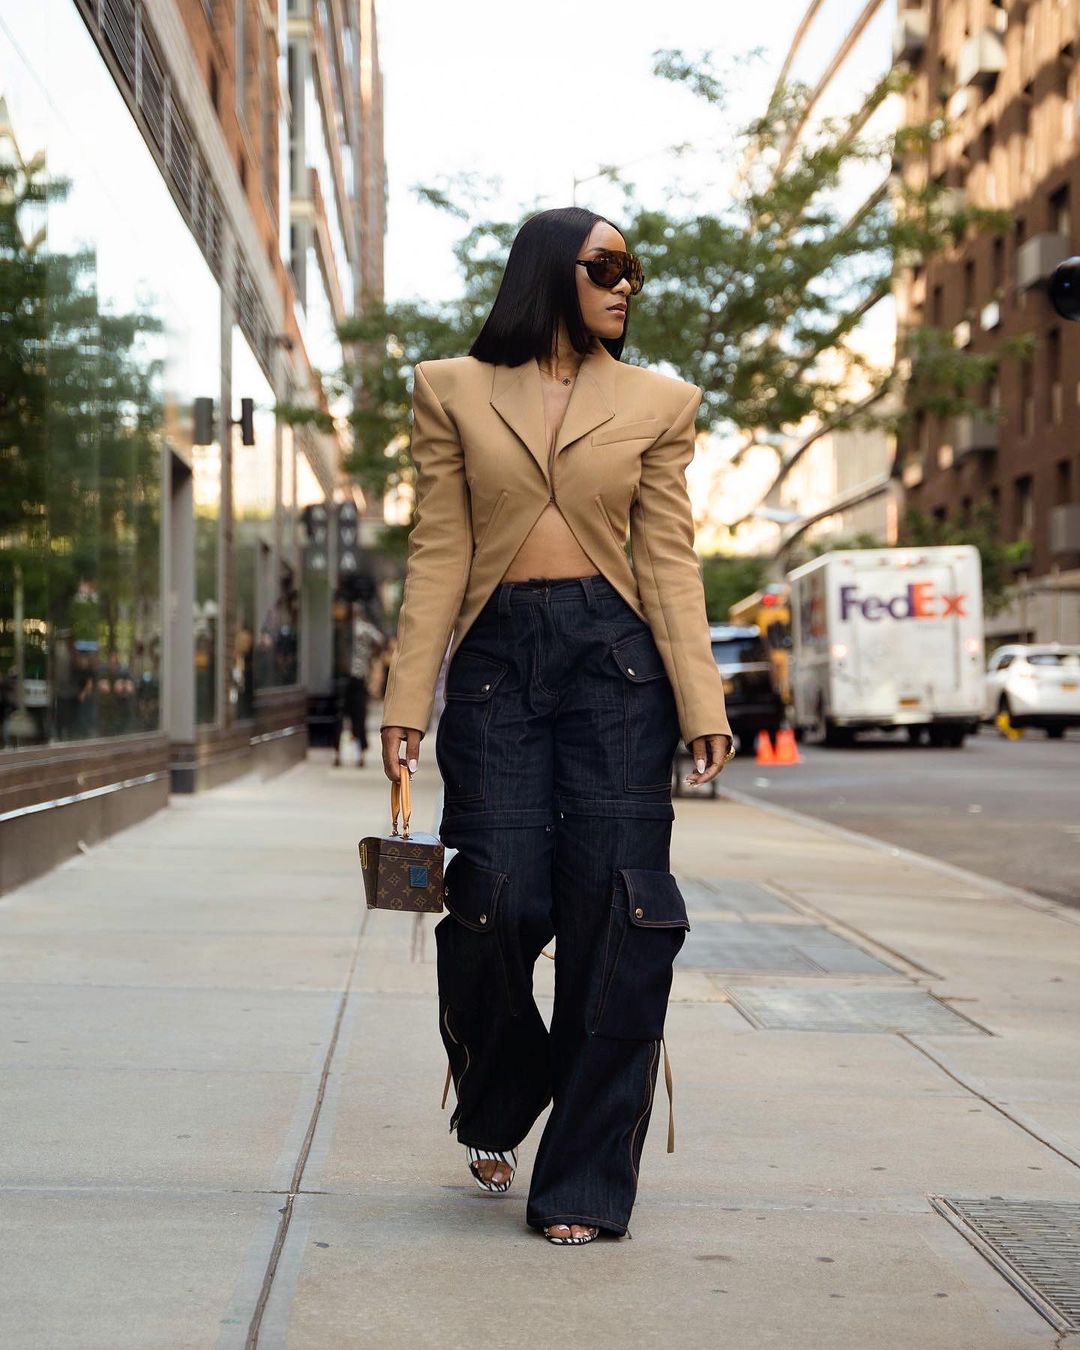 Denim On Denim: The Fall Staple Is Making Its Trendy Rounds | Essence